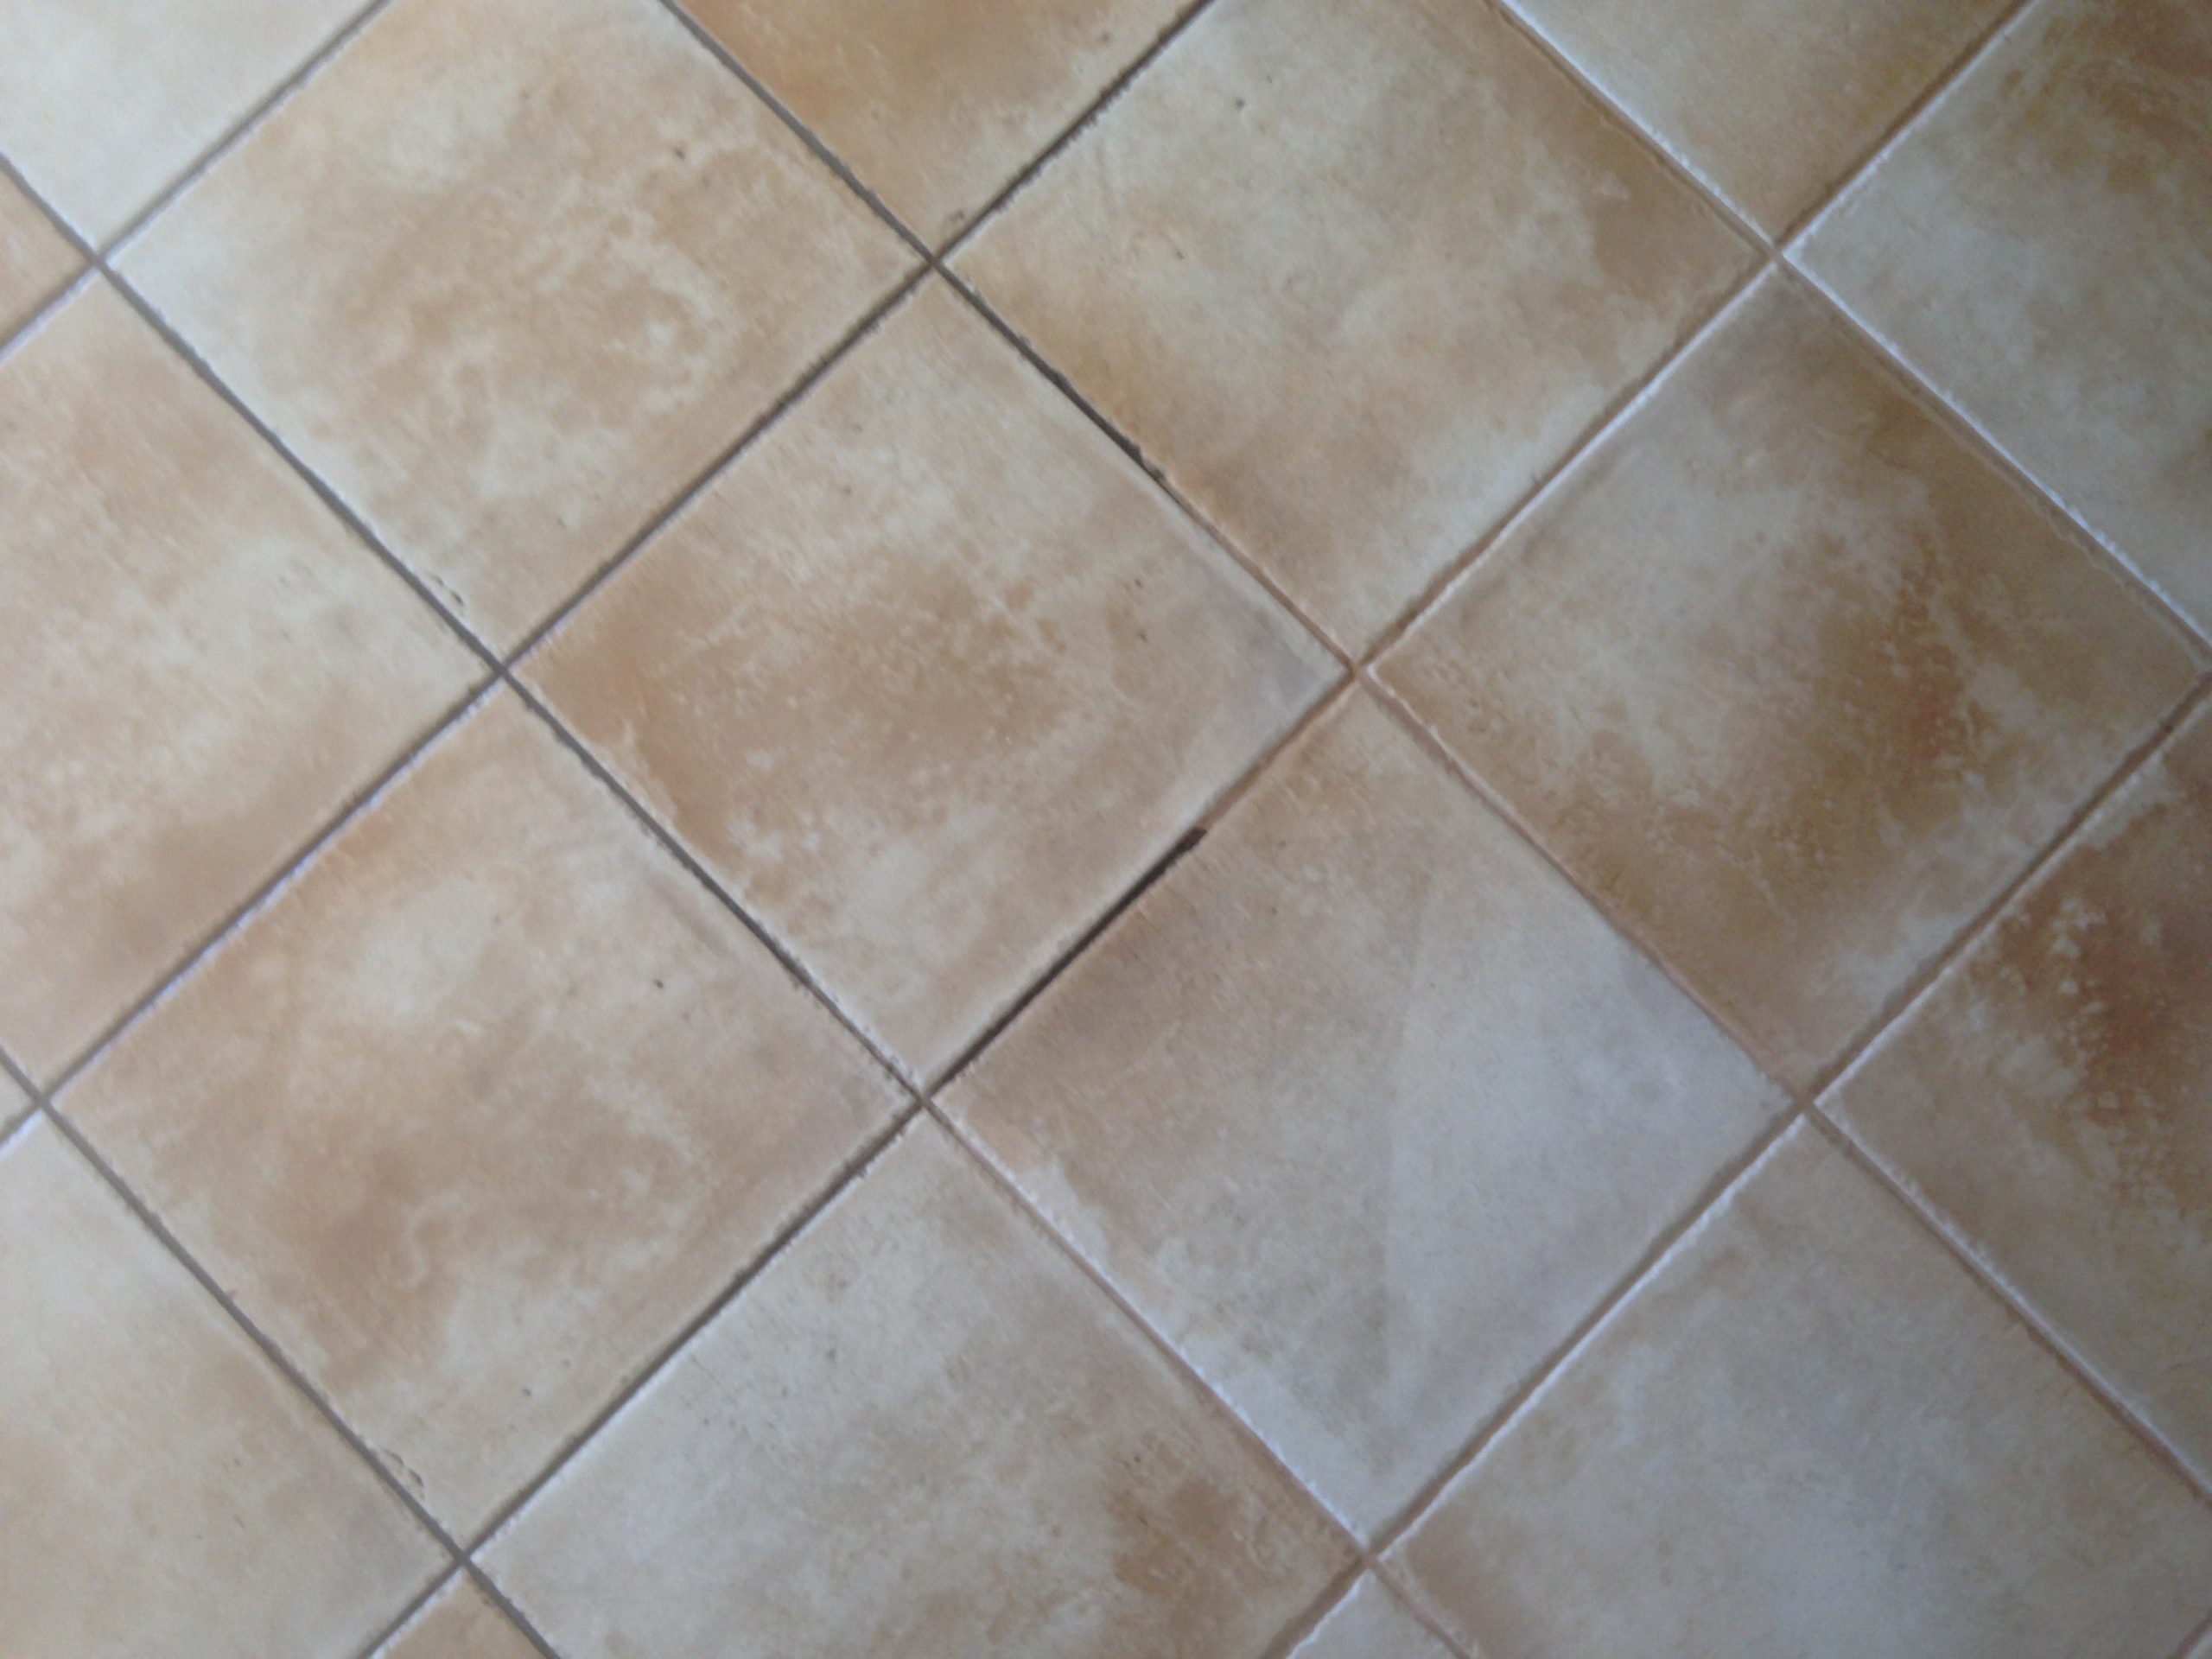 Half Cleaned Tile Grout by Priceless Carpet Cleaning Adelaide